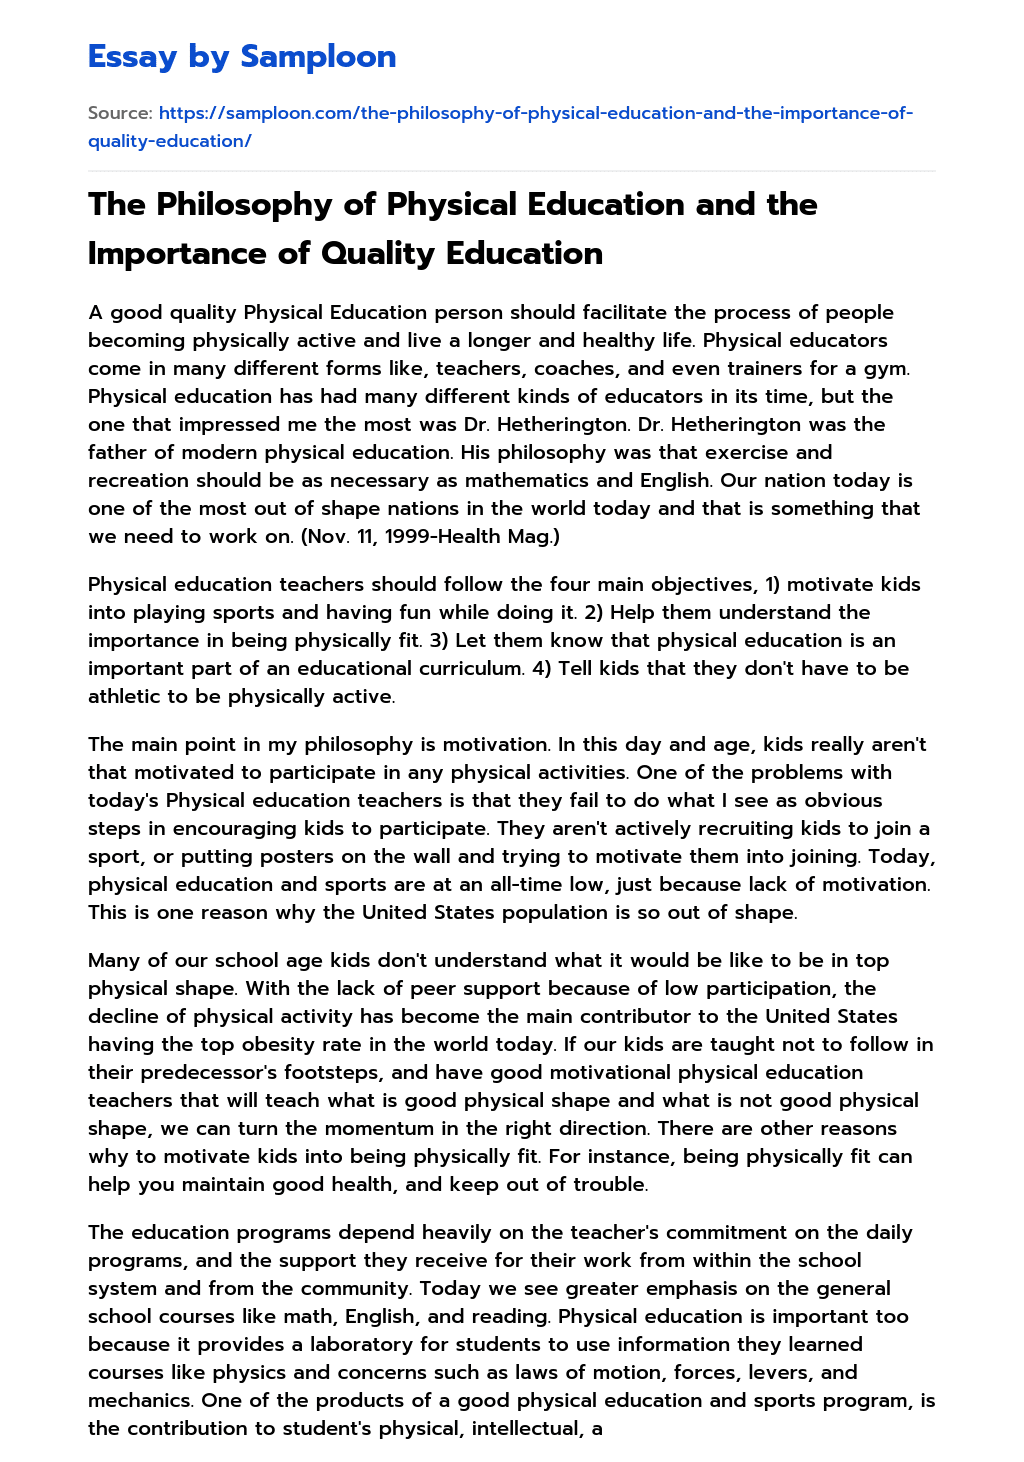 The Philosophy of Physical Education and the Importance of Quality Education essay